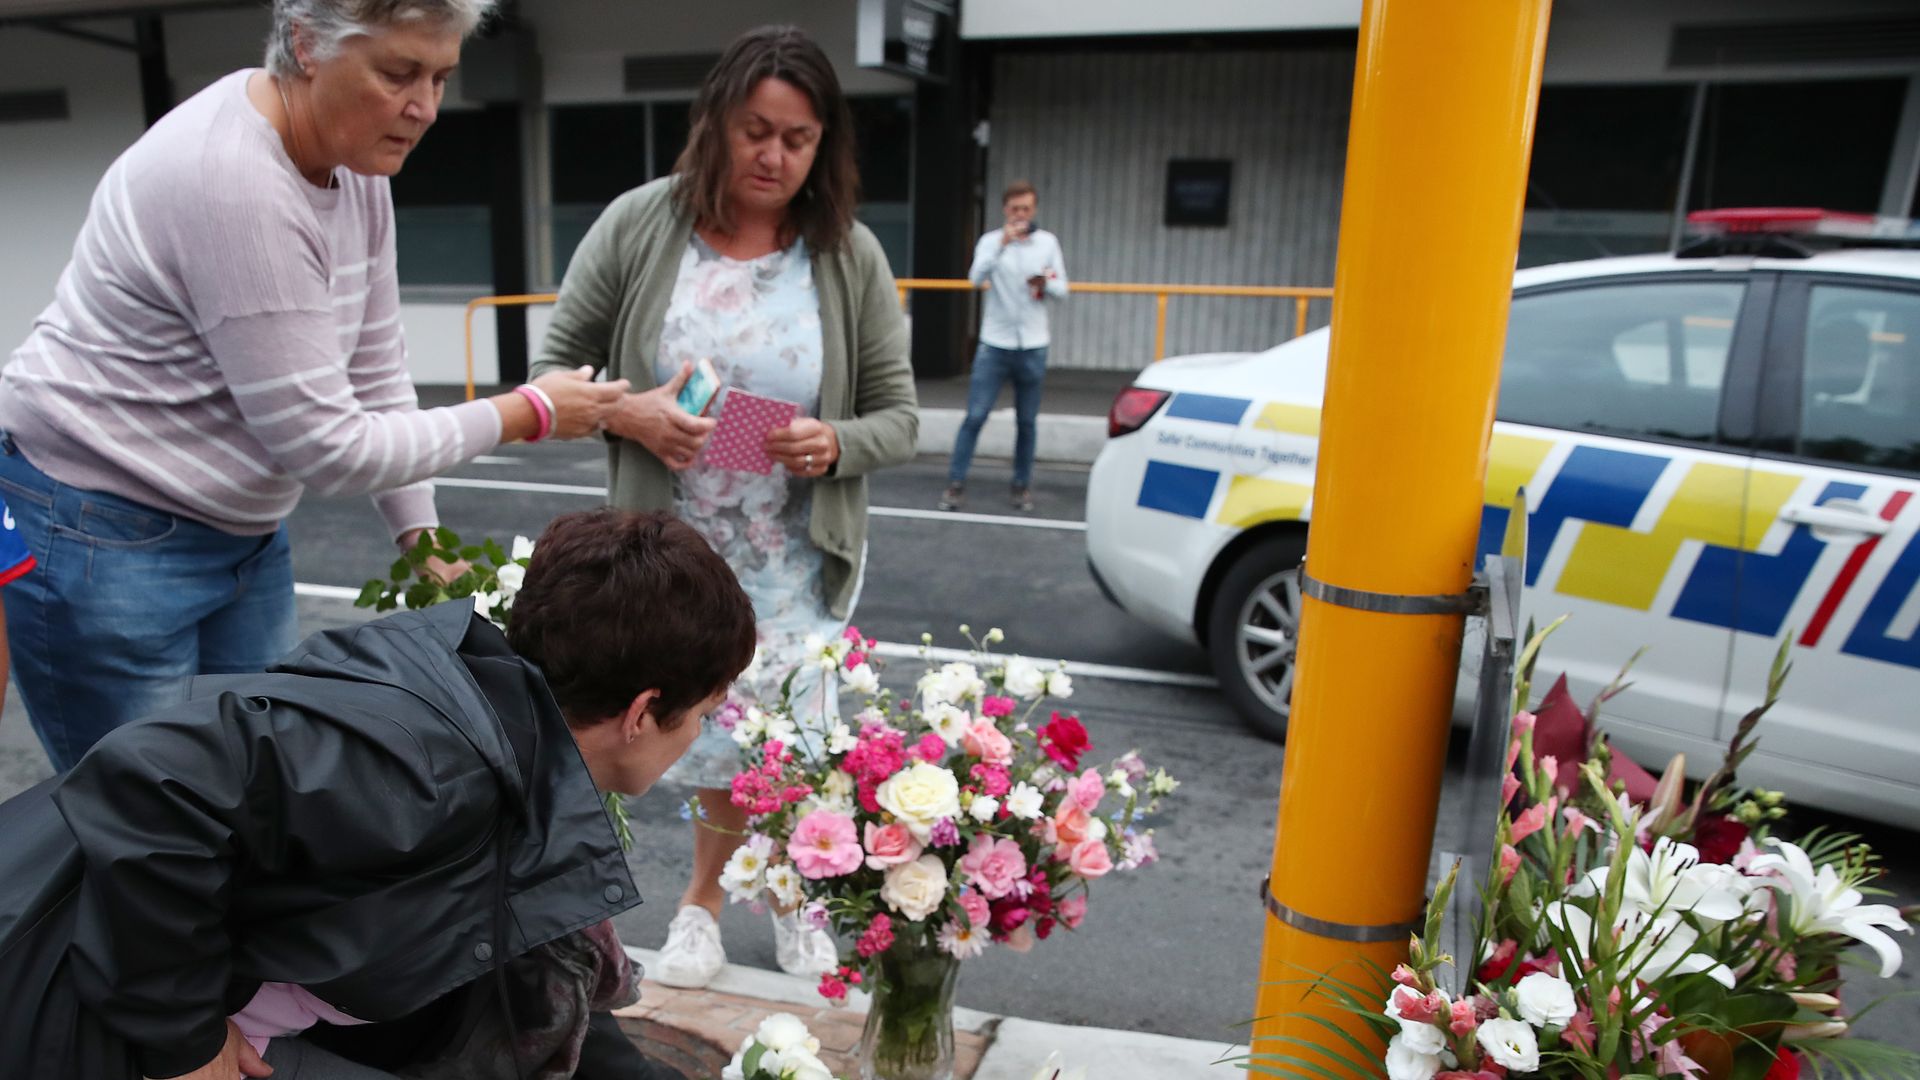 People dropping off flowers in solidarity with mosques in New Zealand.